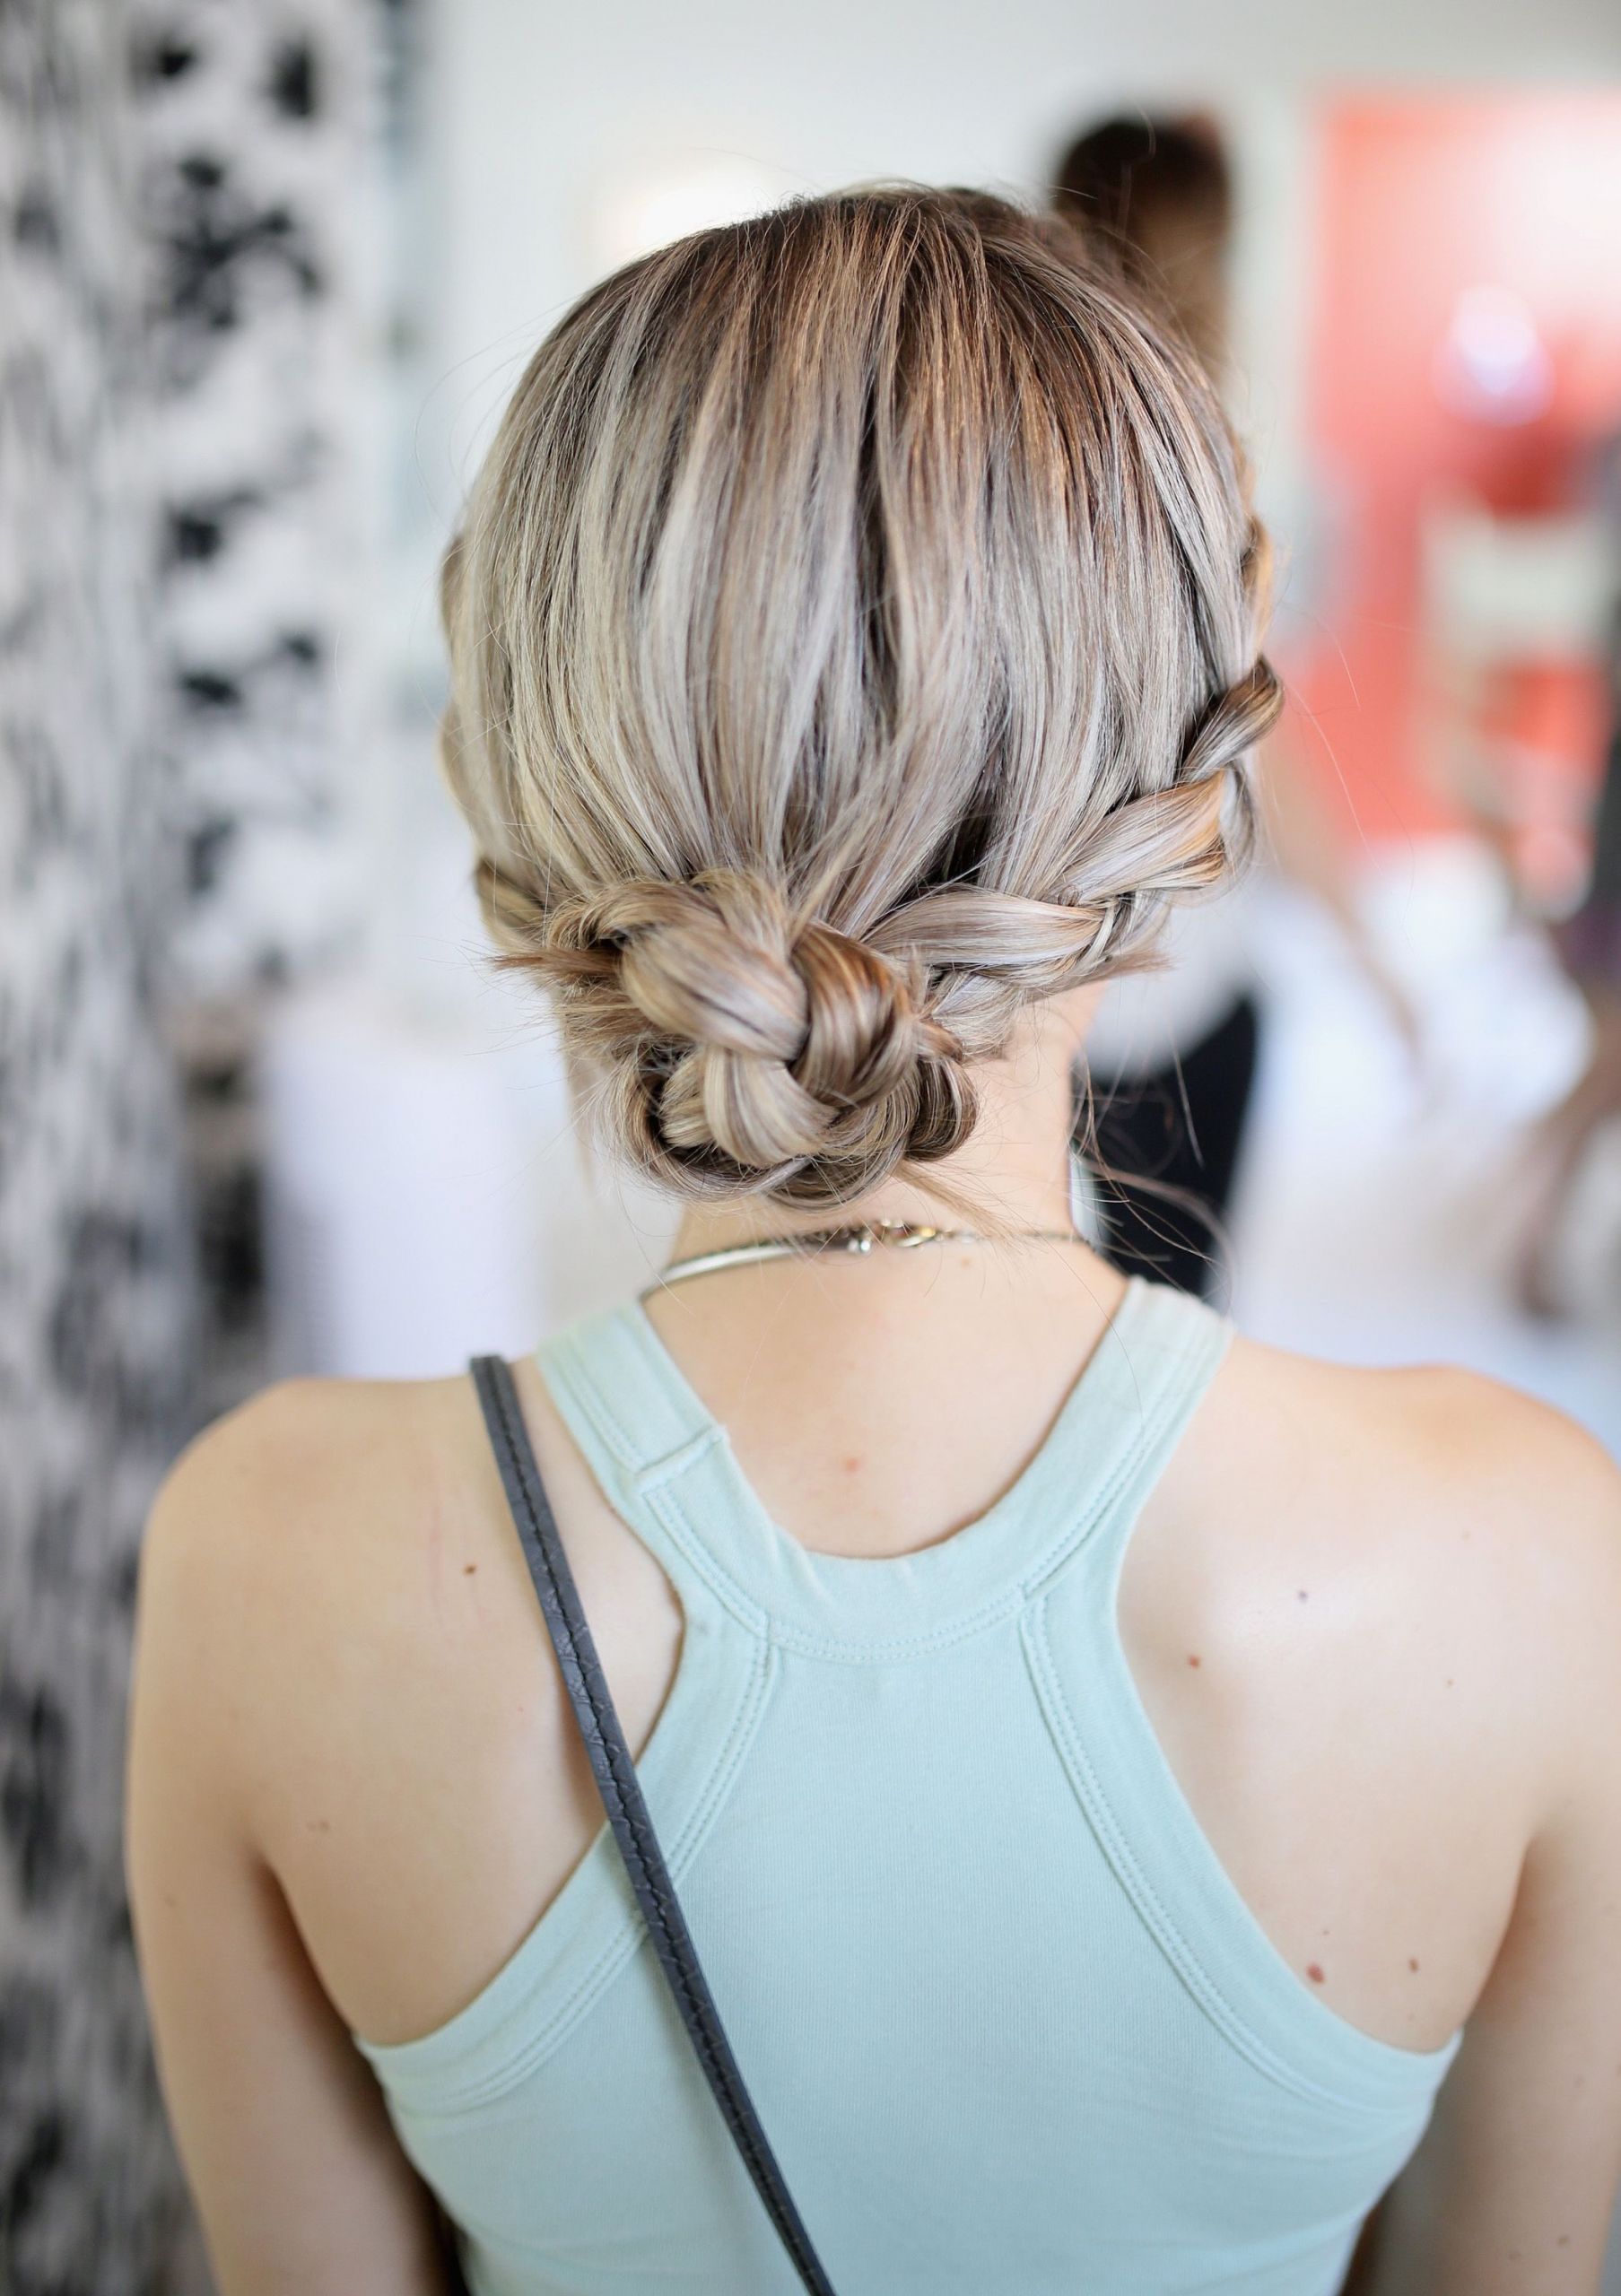 Cute Waitress Hairstyles
 5 Things to Do With Your Hair When It s Humid Outside